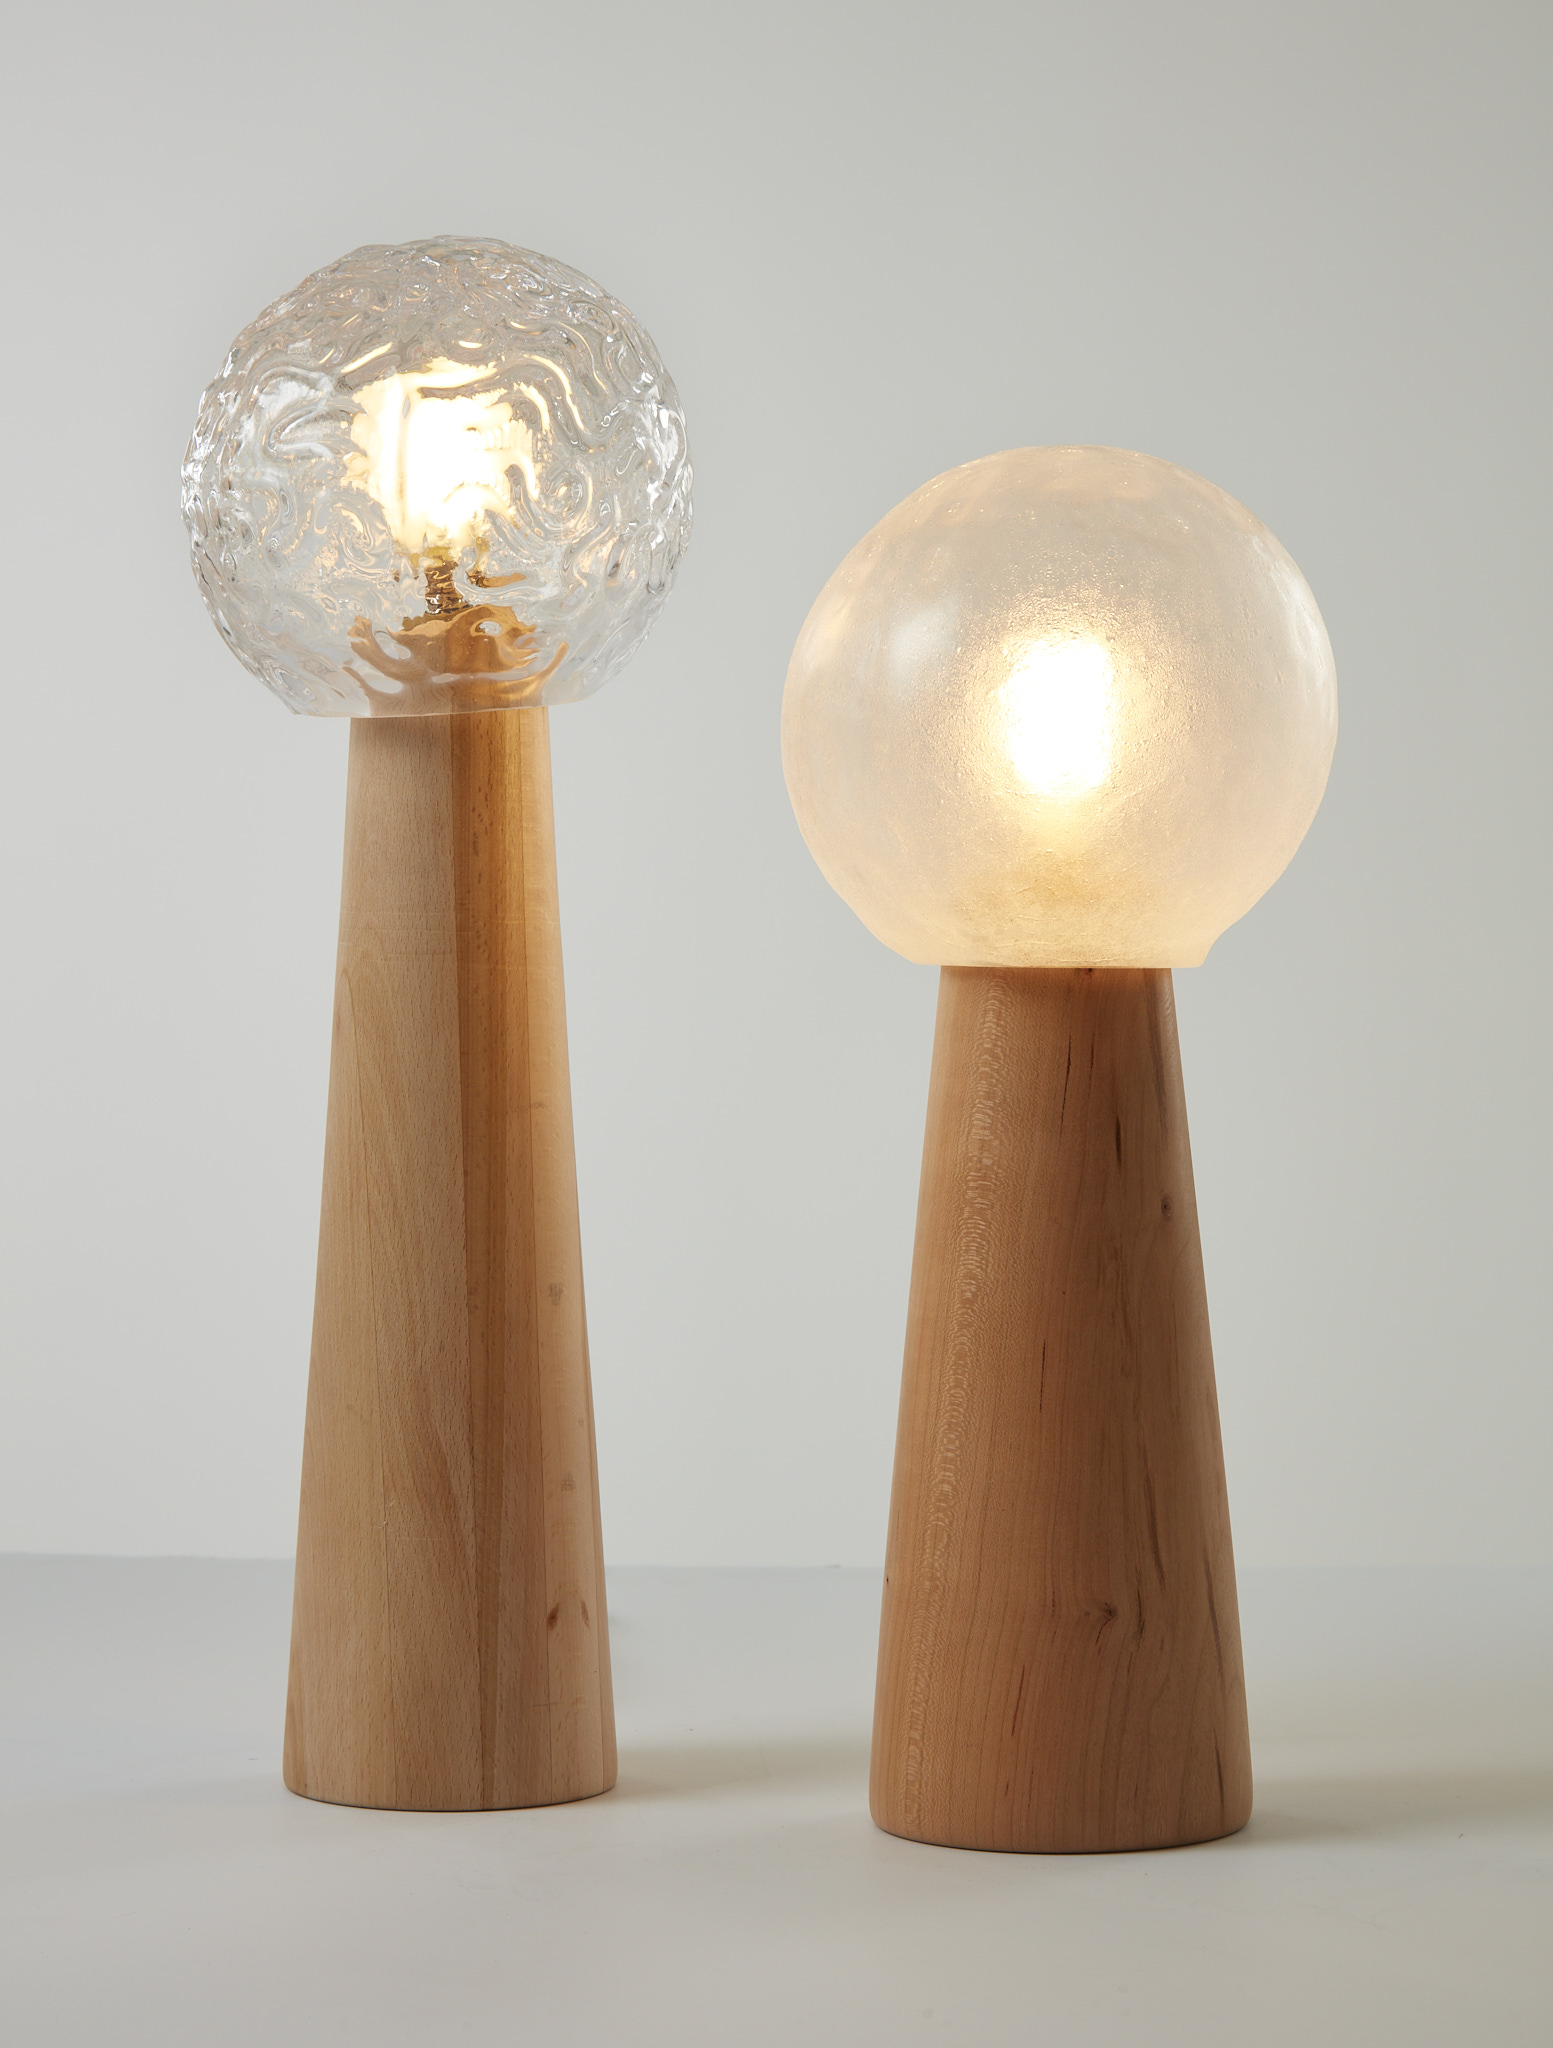 /Table%20Lamps%20made%20of%20glassblown%20glass%2C%20beech%2C%20cherry%20and%20lightbulb.